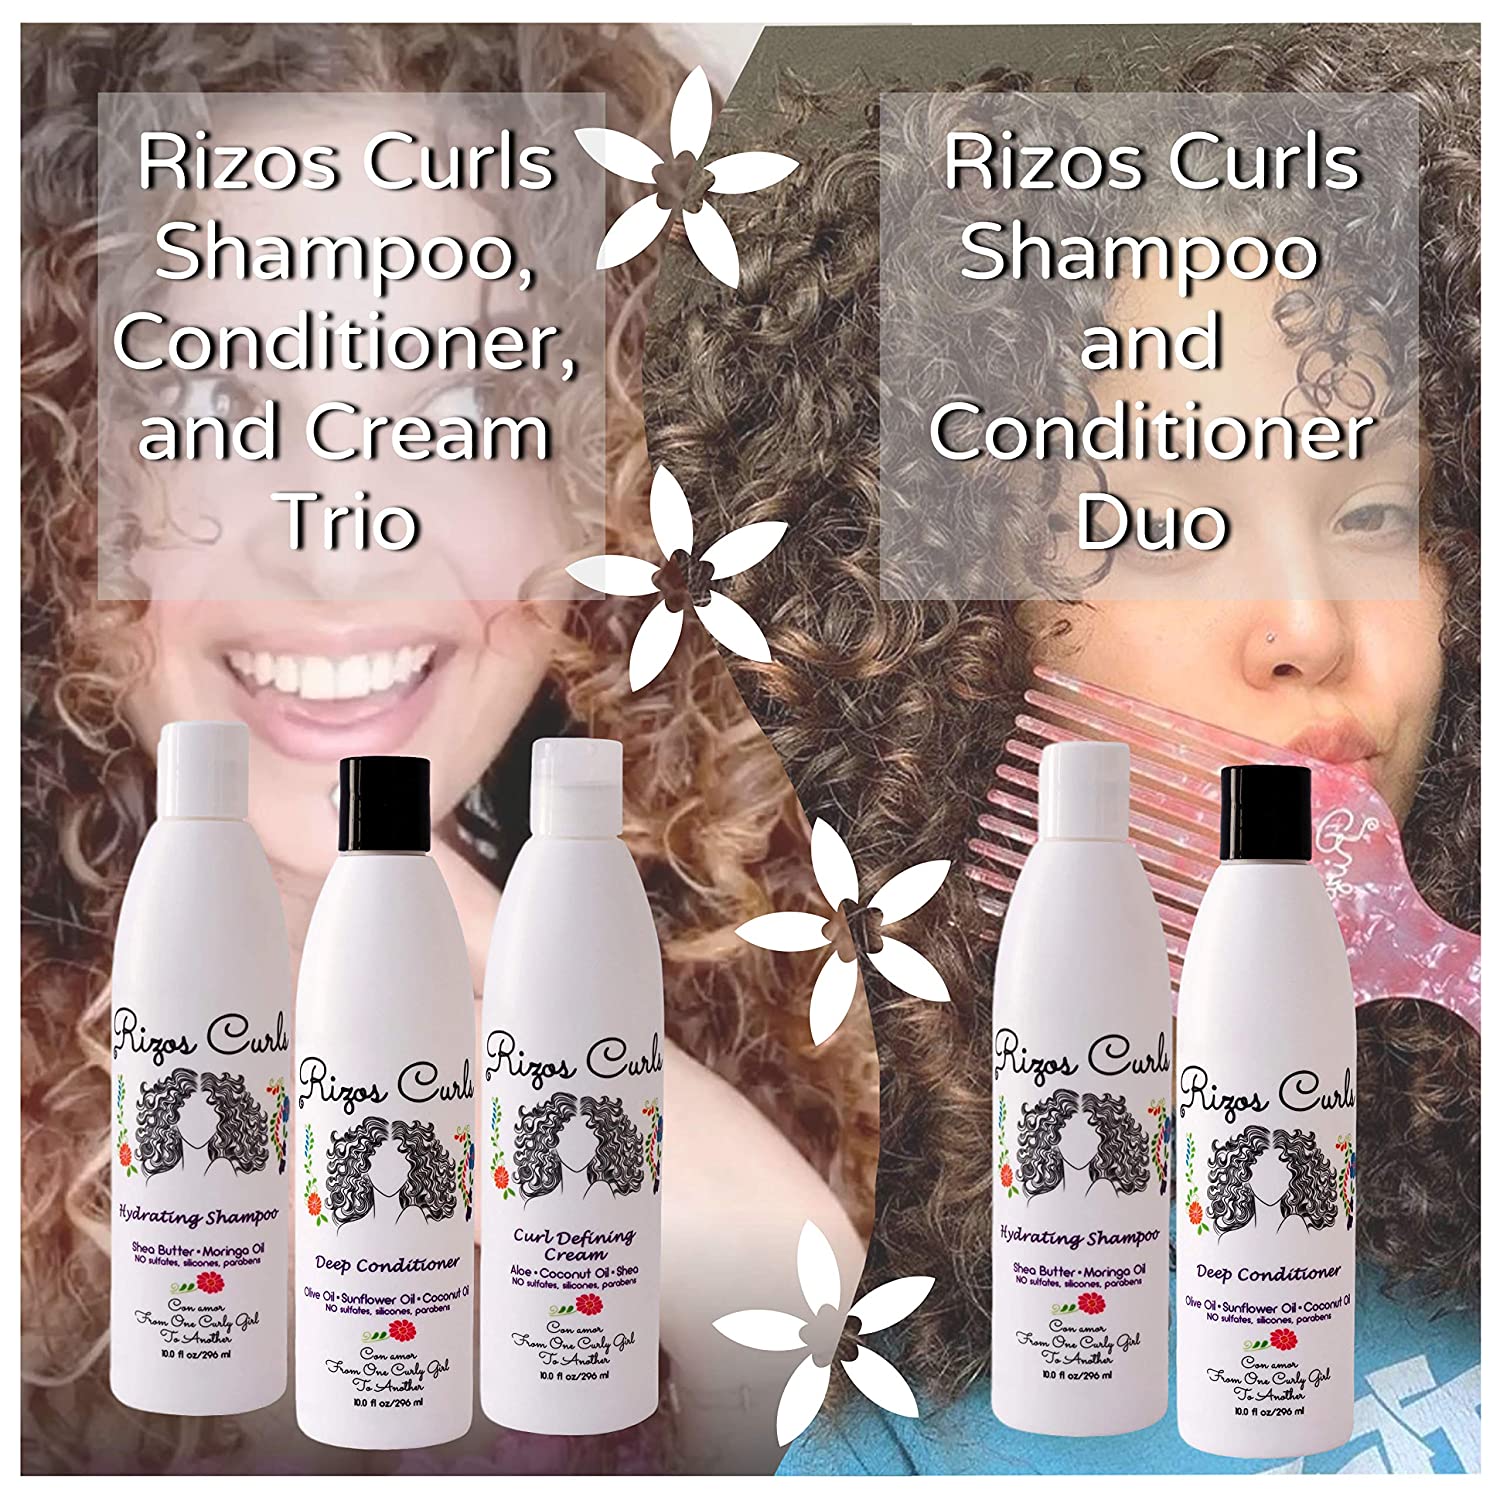 Rizos Curls Hydrating Shampoo, Deep Conditioner & Curl Defining Cream for Curly Hair Products - Intense Treatment & Nourishment for Wavy and Curly Hair (Hair Care Set) - image 3 of 7